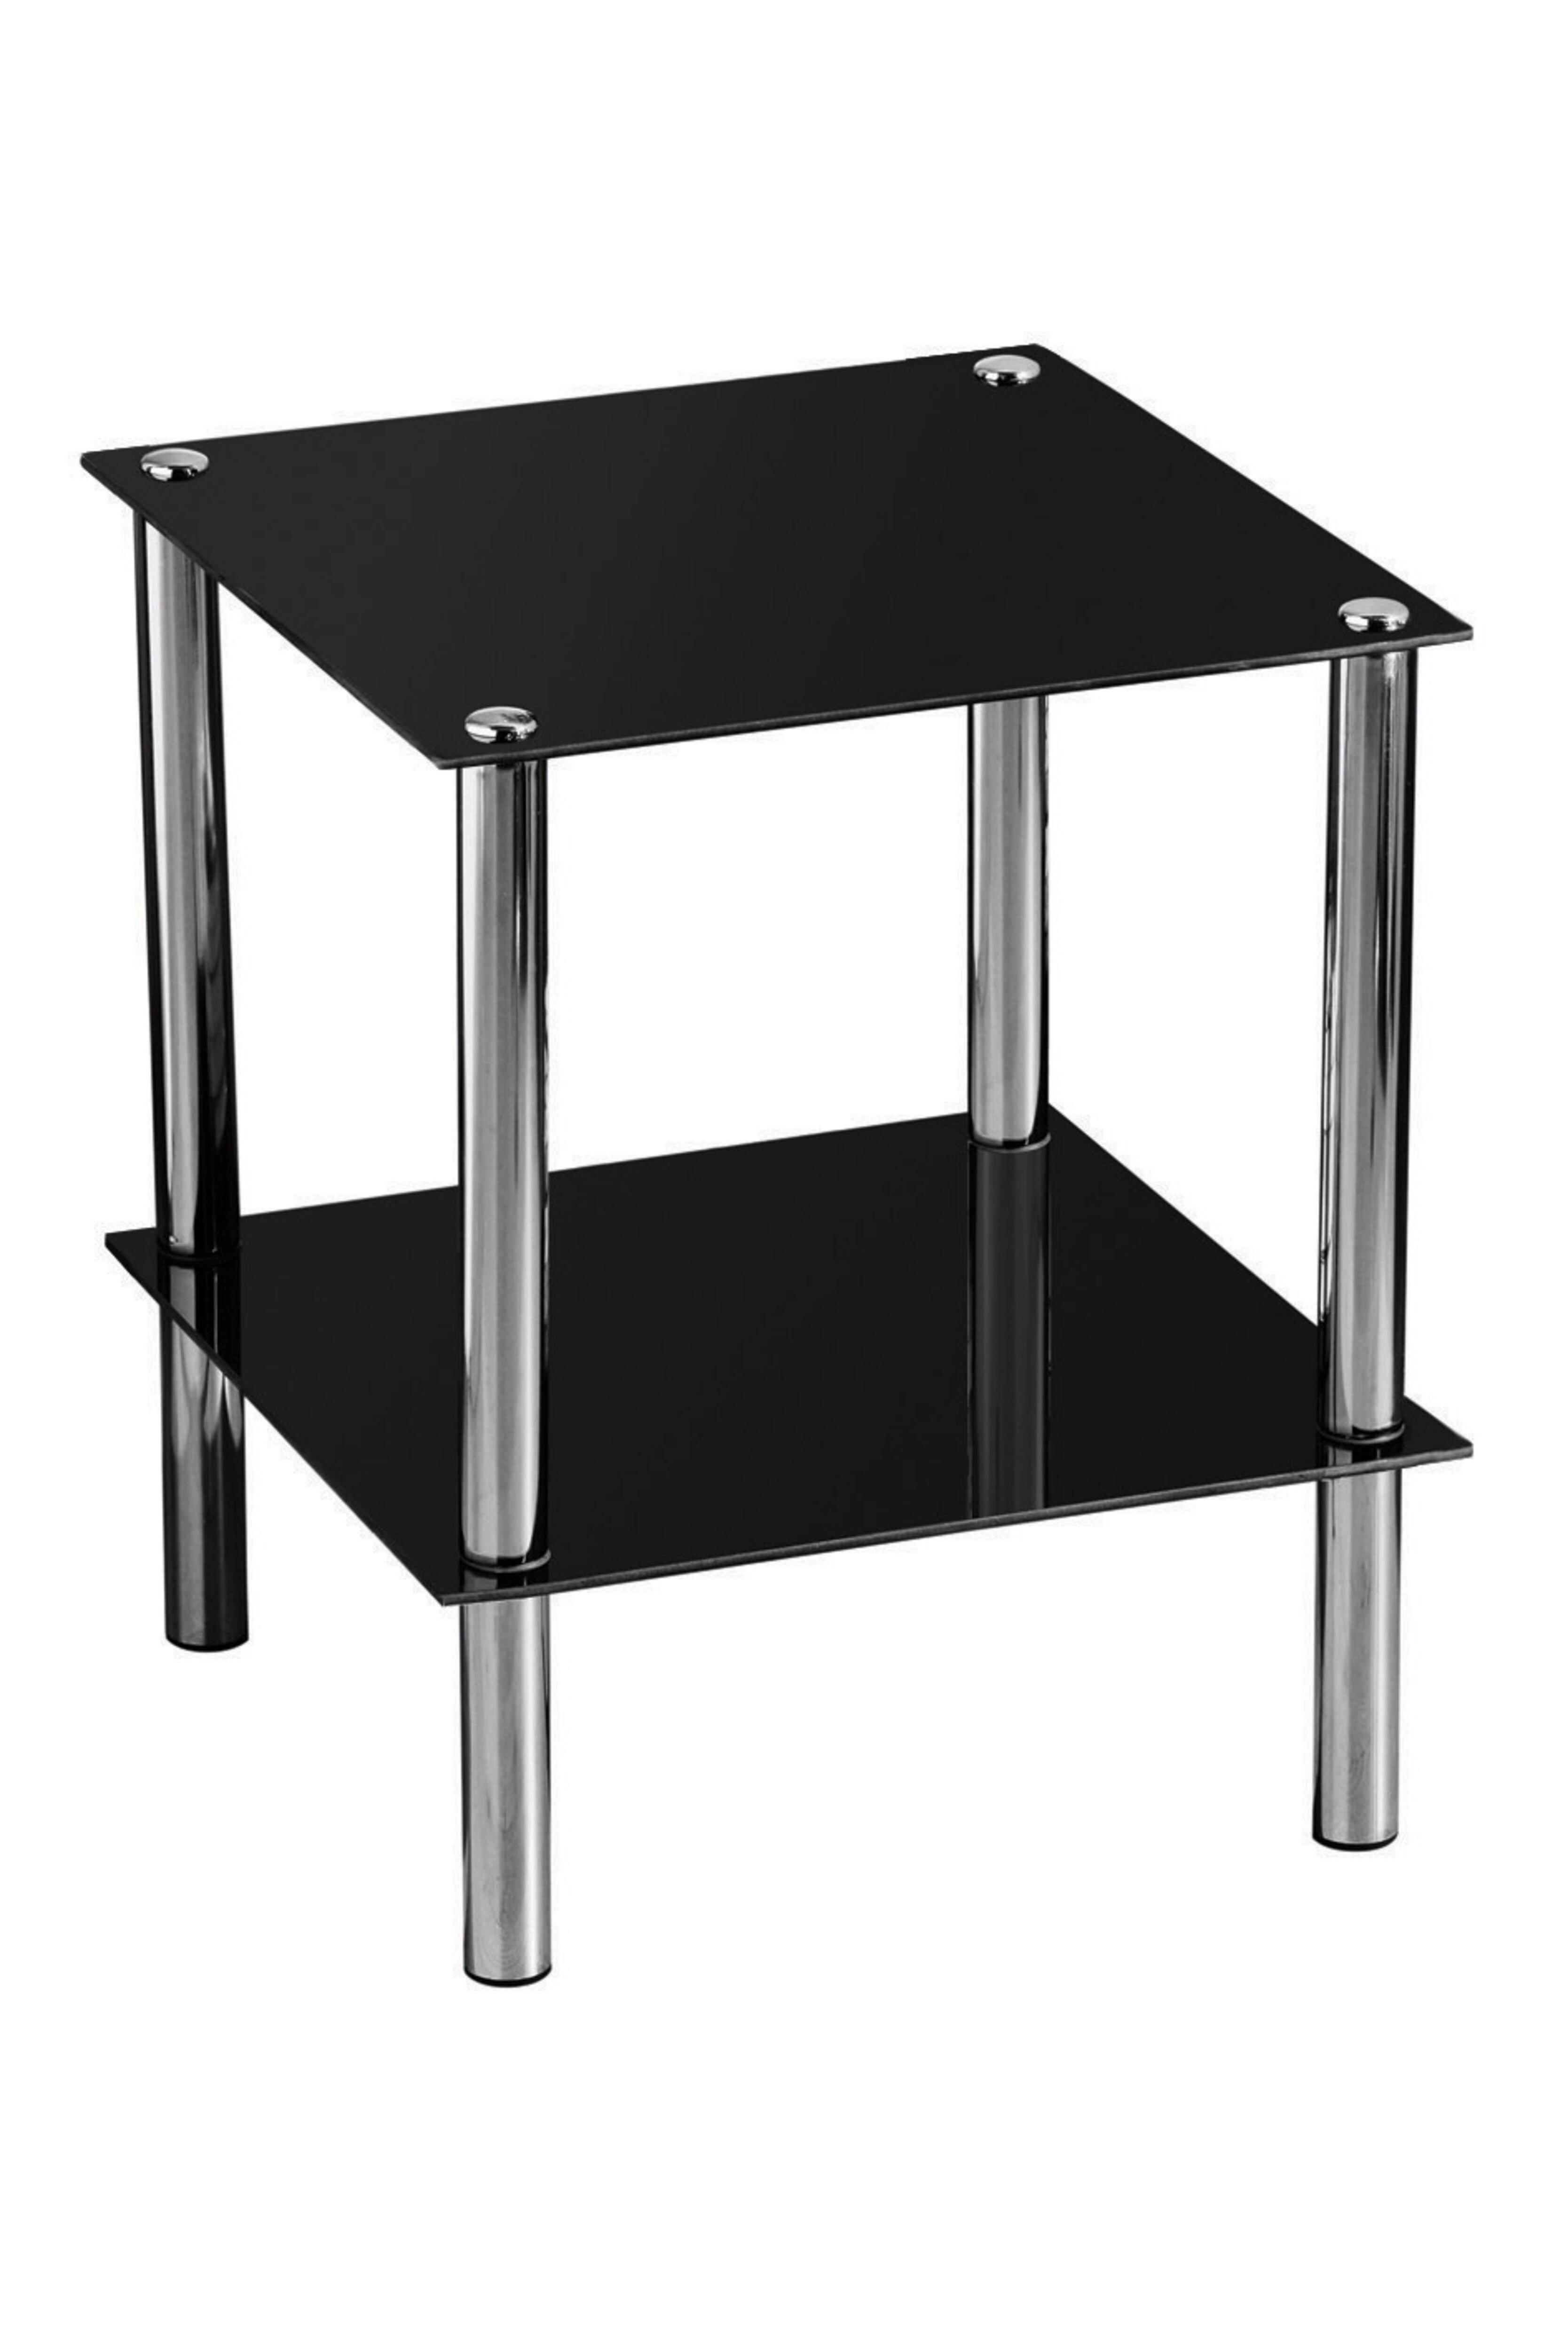 2 Tier Black Glass End Table